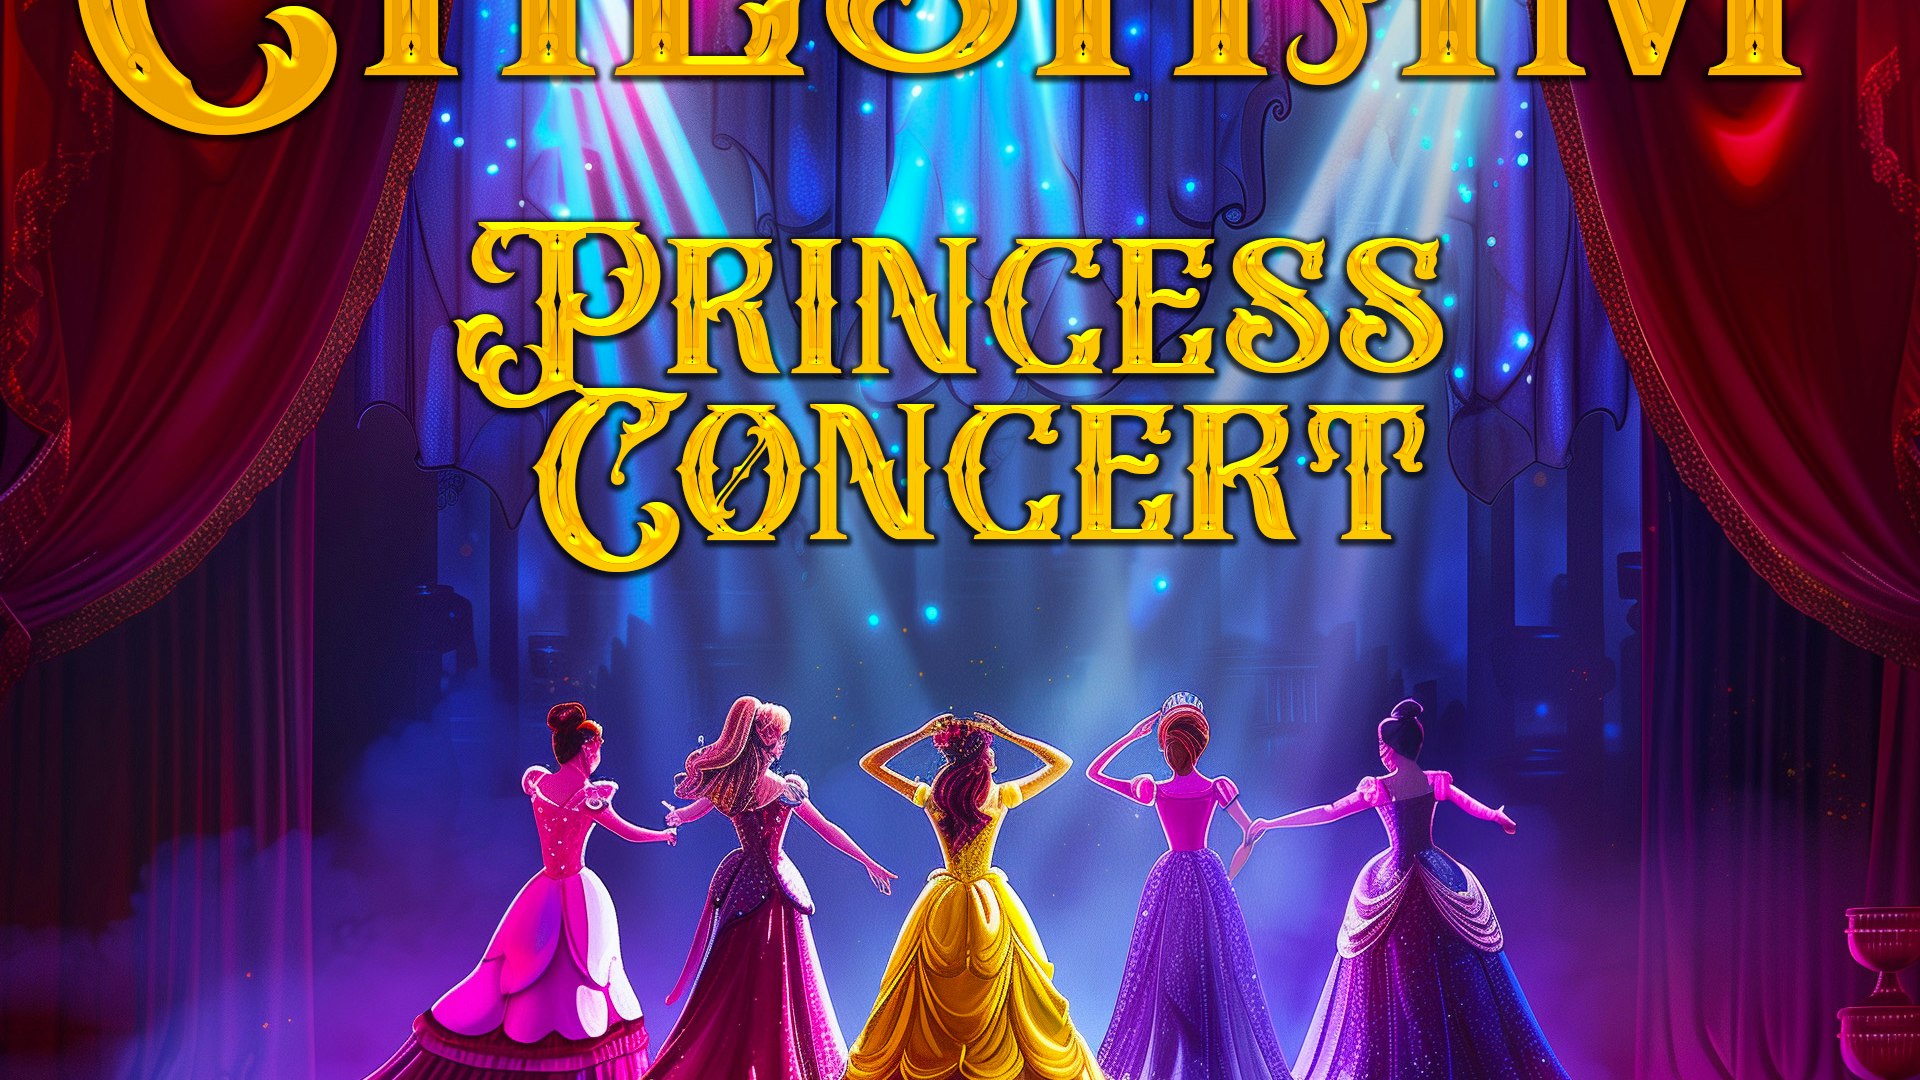 The Princess Concert Comes To Chesham✨👑